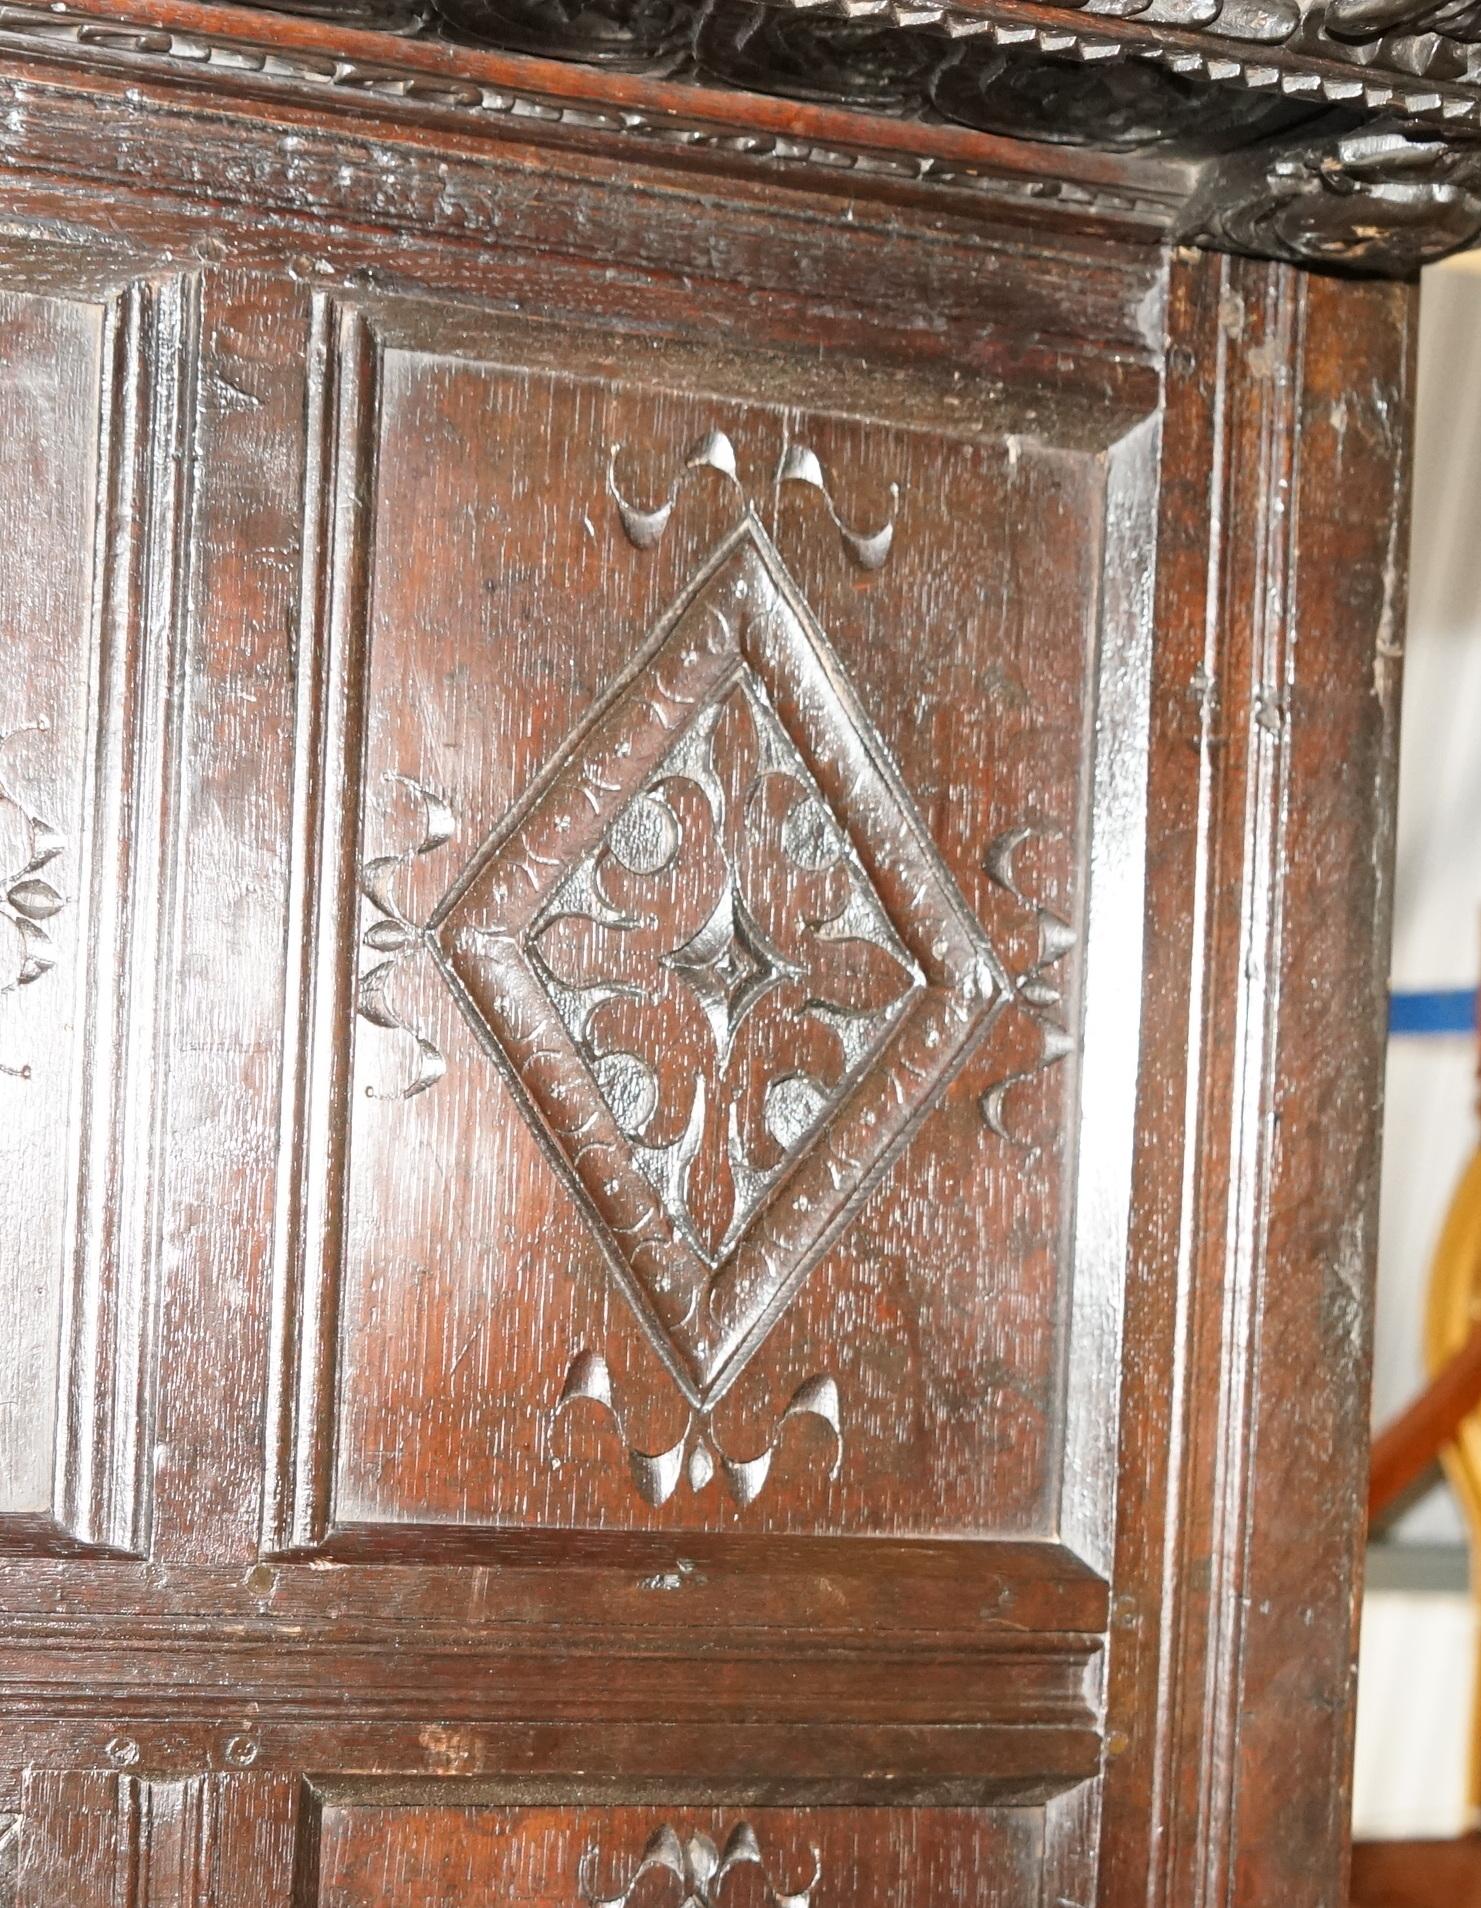 17TH CENTURY JACOBEAN WILLIAM III CIRCA 1650 ENGLiSH OAK TESTER FOUR POSTER BED For Sale 3